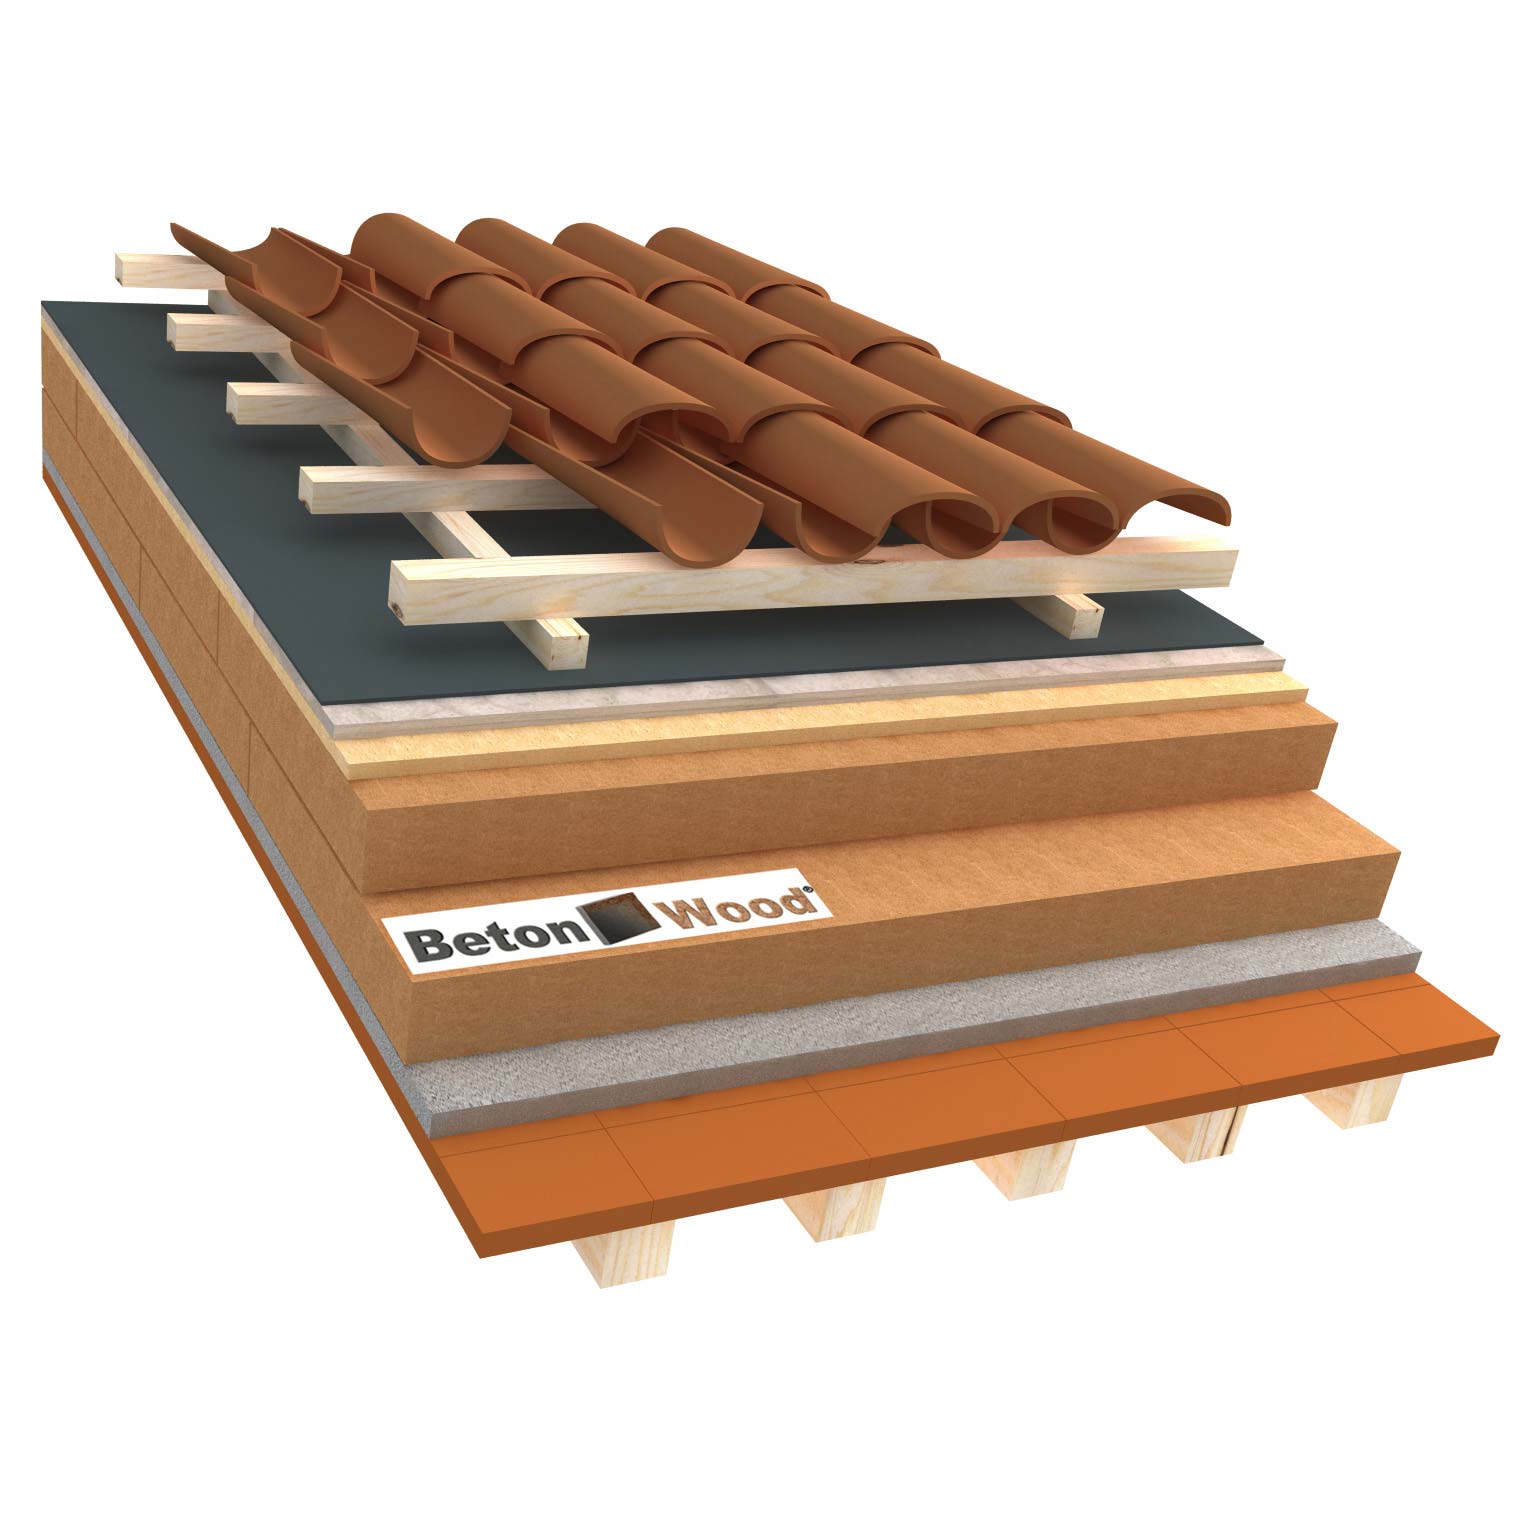 Ventilated roof with fiber wood Isorel, Special dry and cement bonded particle boards on terracotta tiles